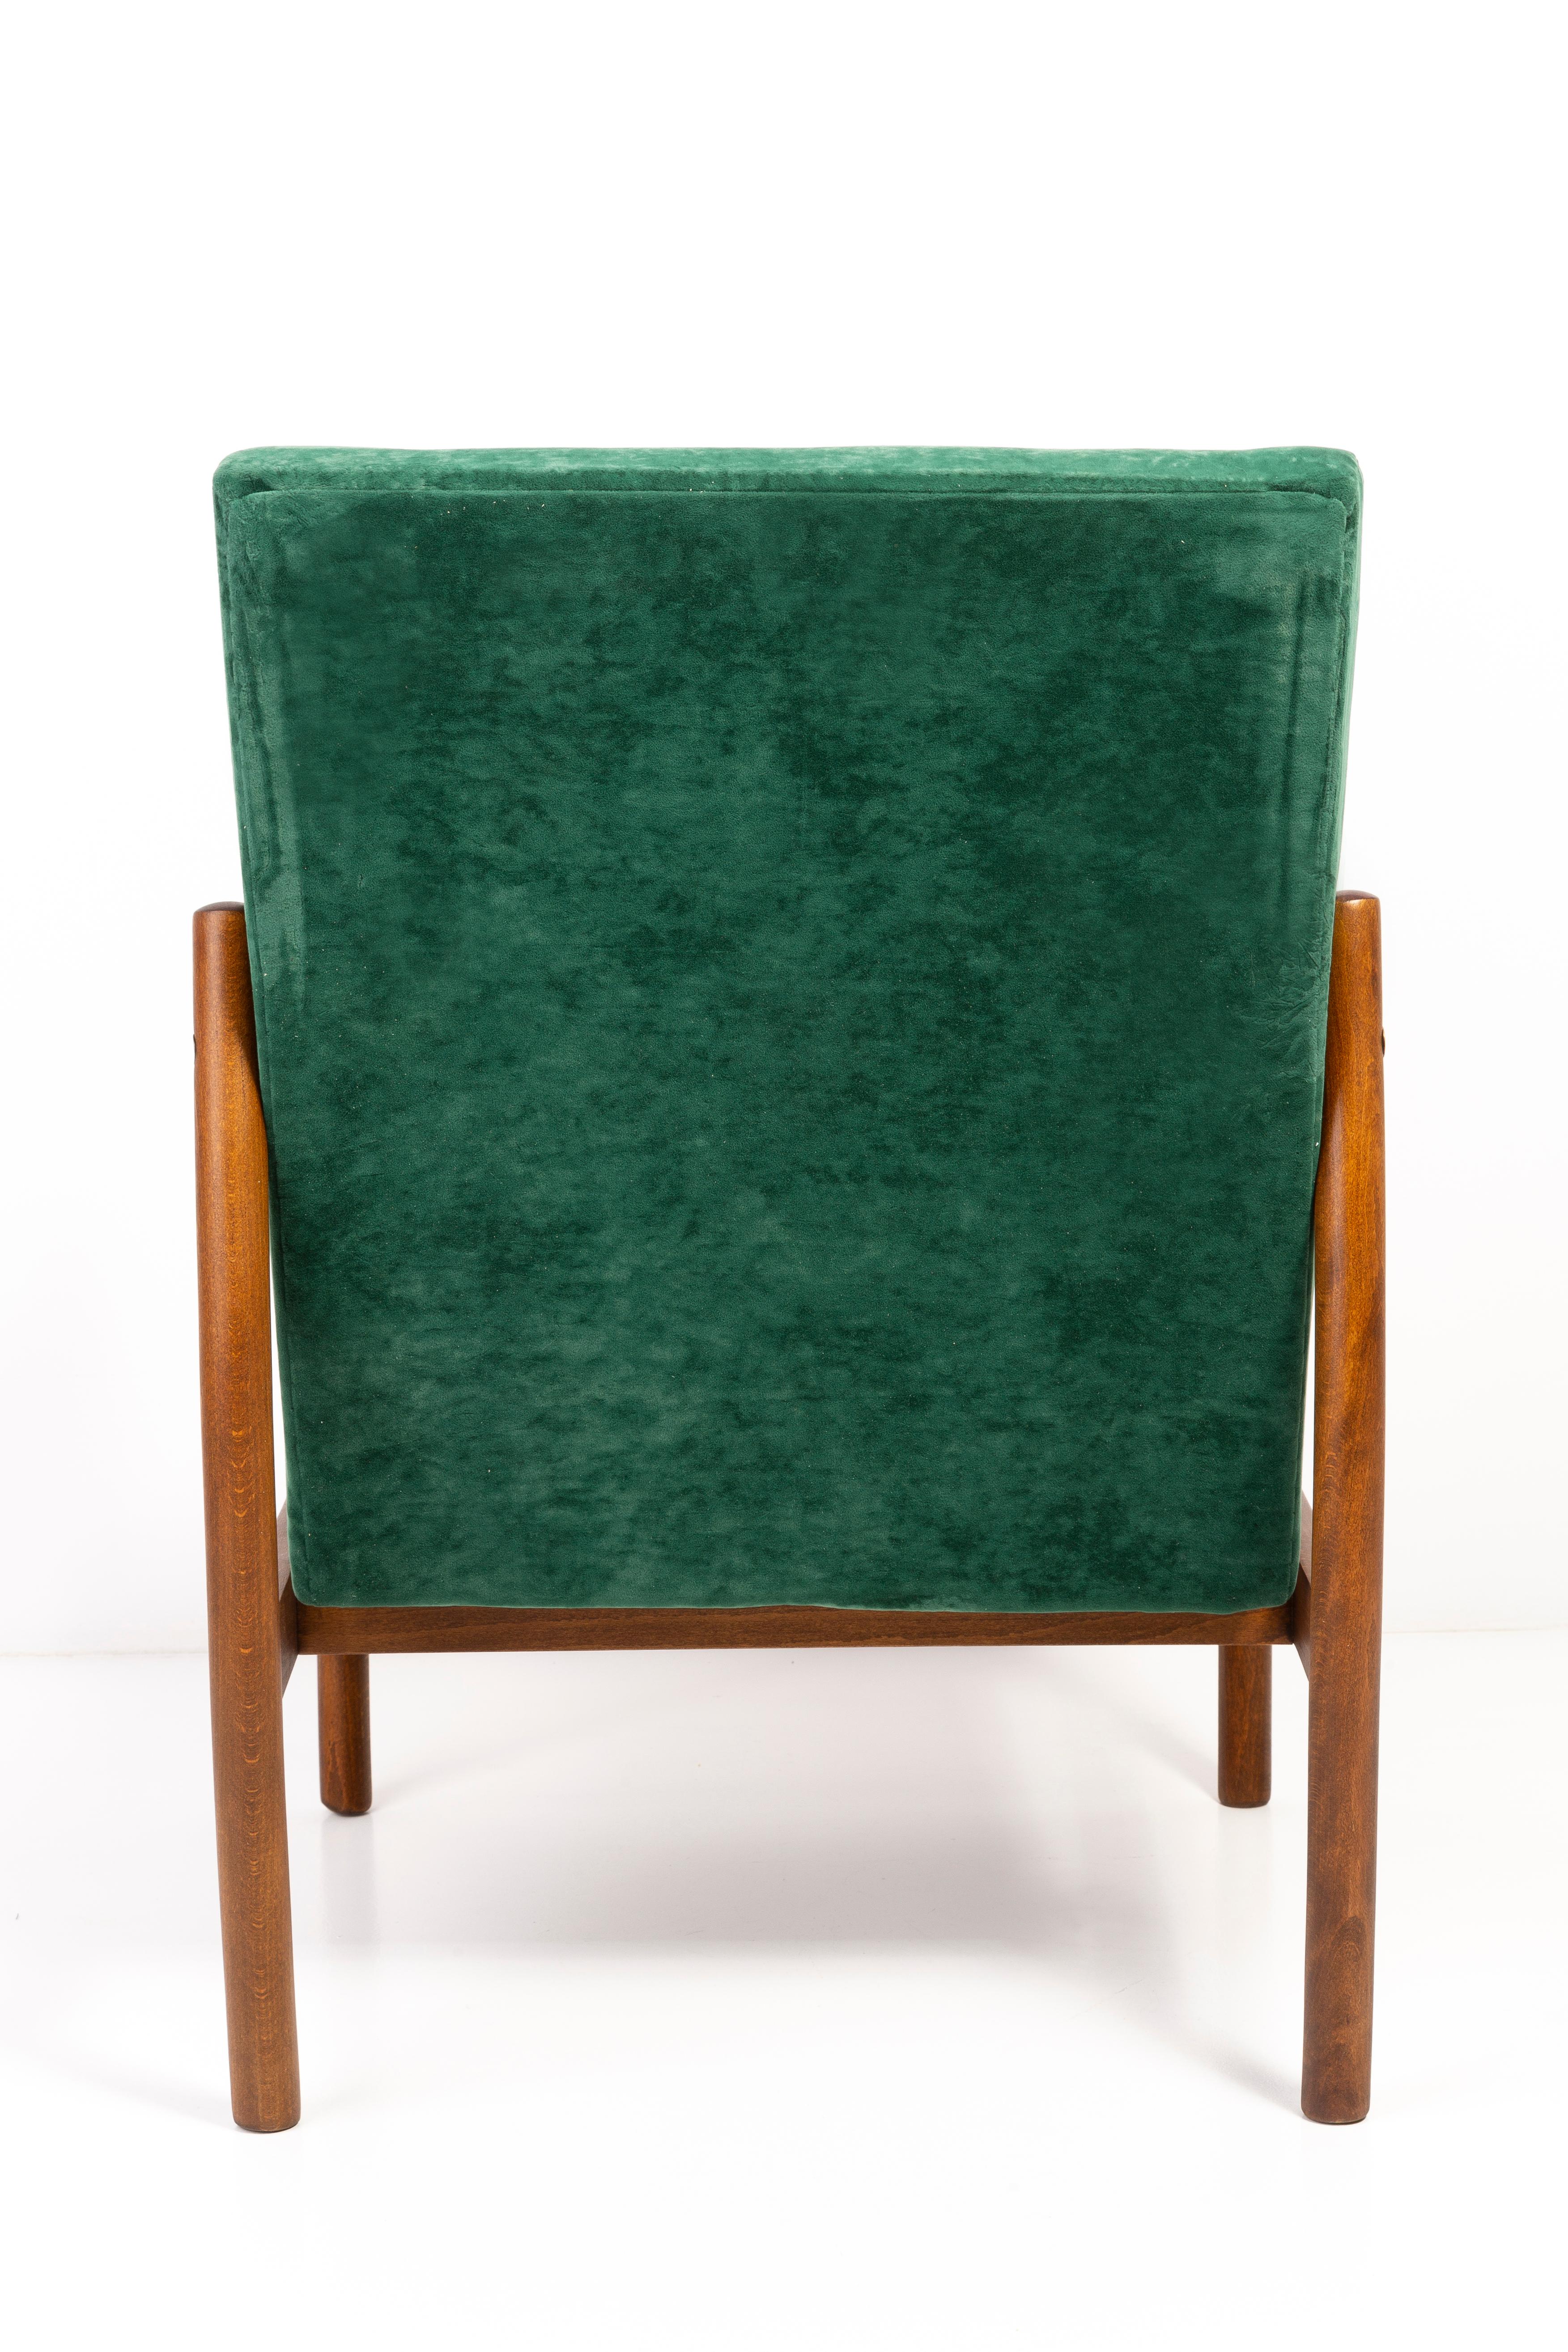 Set of Two Mid-20th Century Vintage Armchairs, Dark Green Velvet, Europe, 1960s For Sale 3